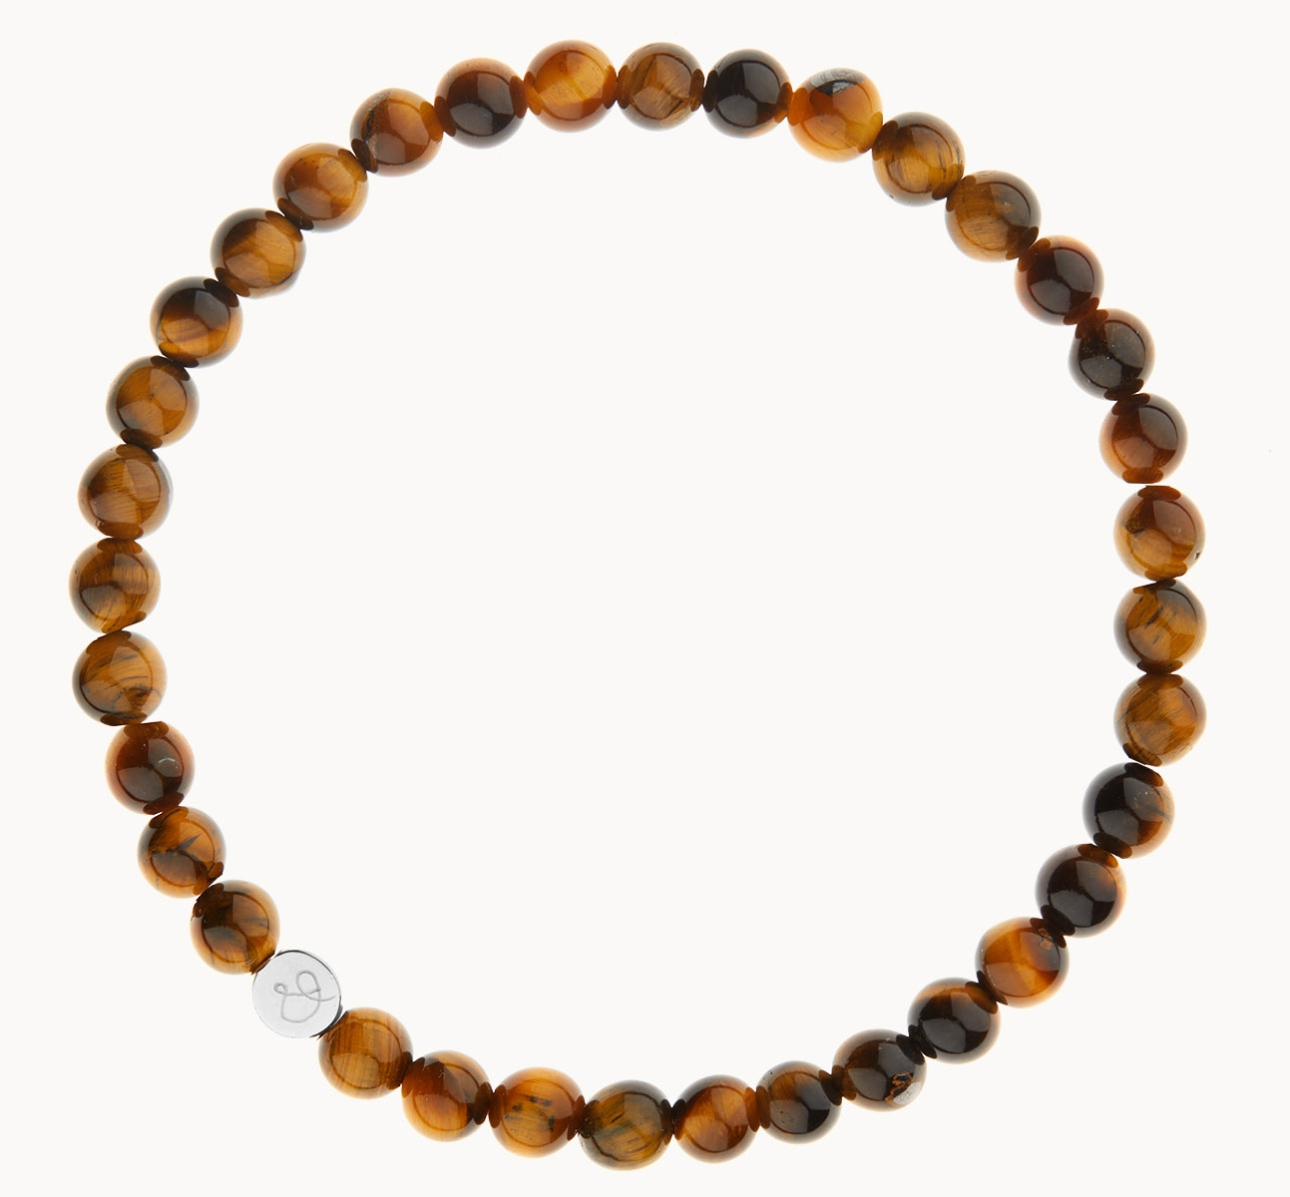 A men's personalised bracelet with semi-precious beads from Merci Maman